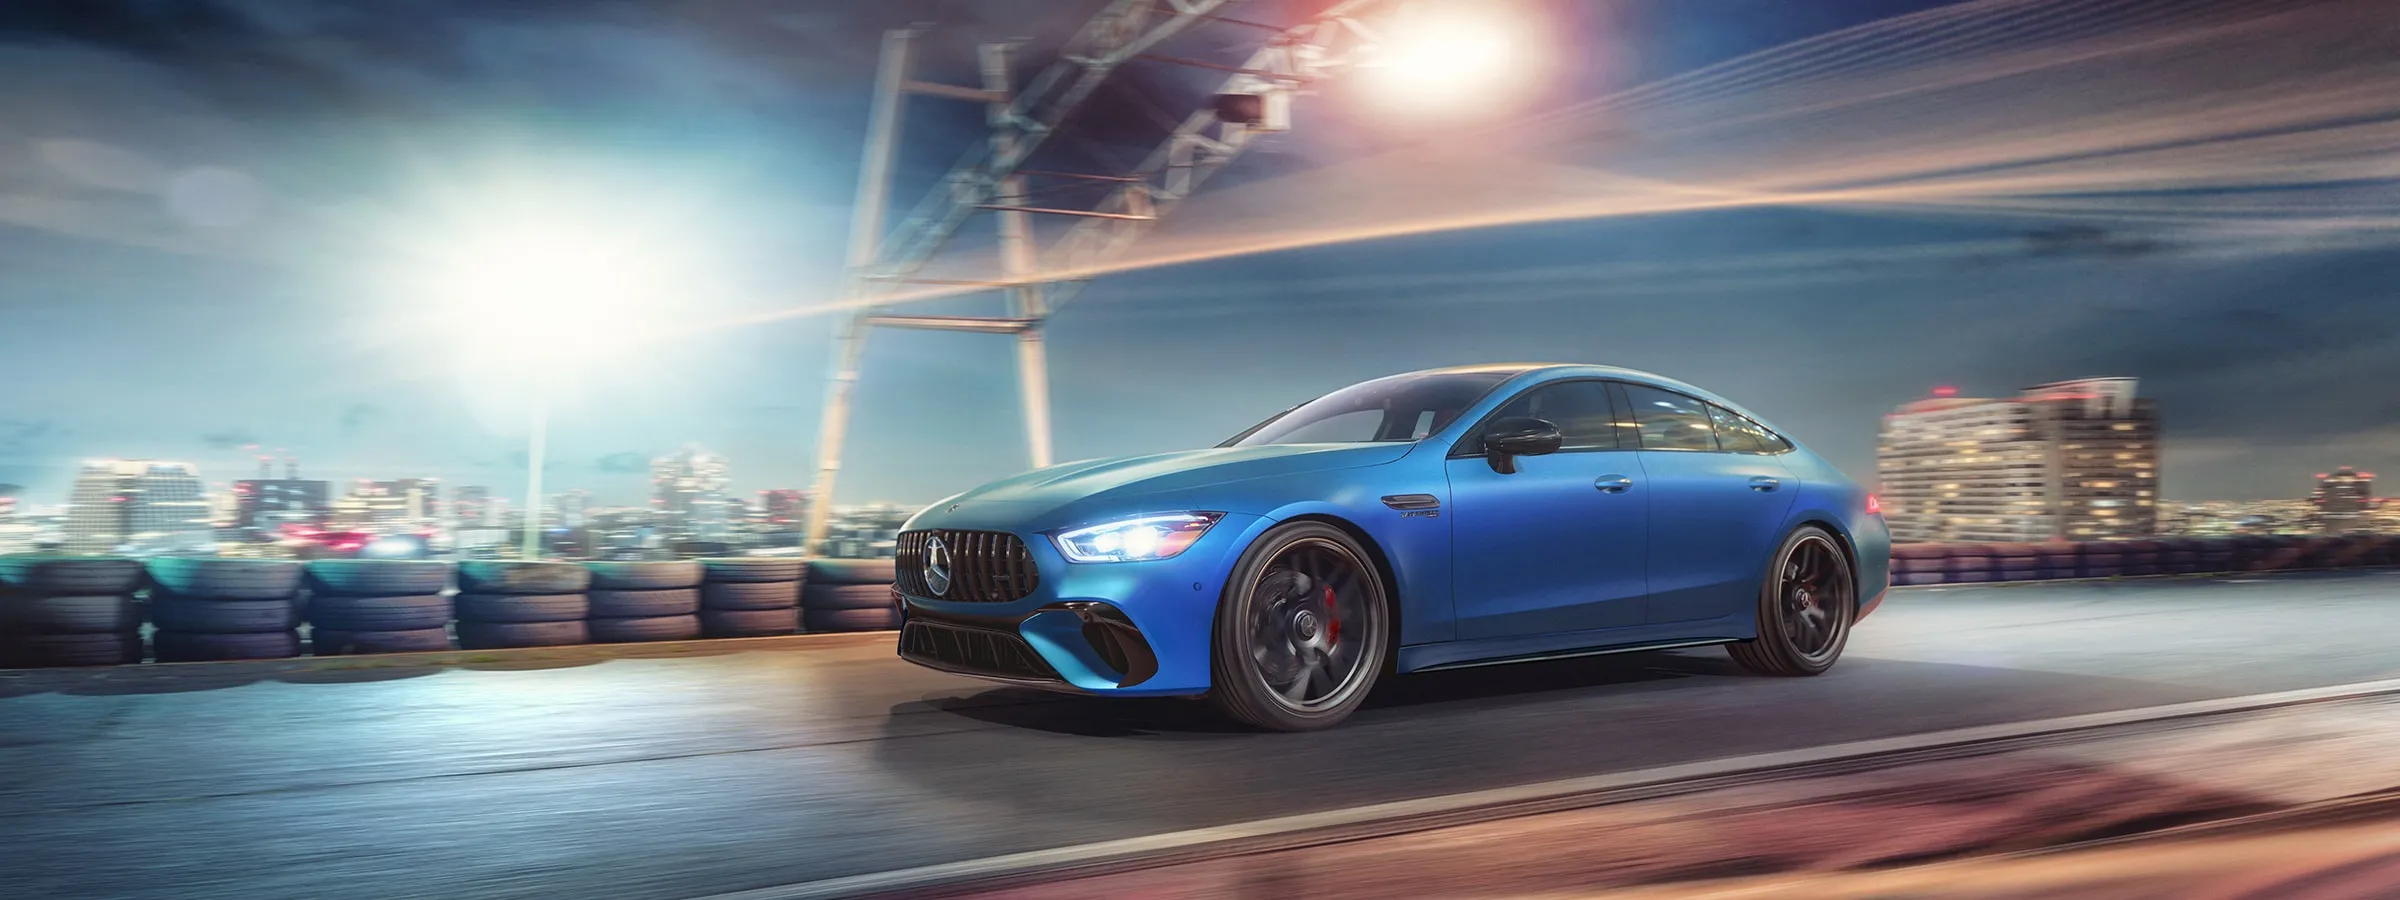 The Amg Gt 4-Door Coupe | Mercedes-Benz Usa